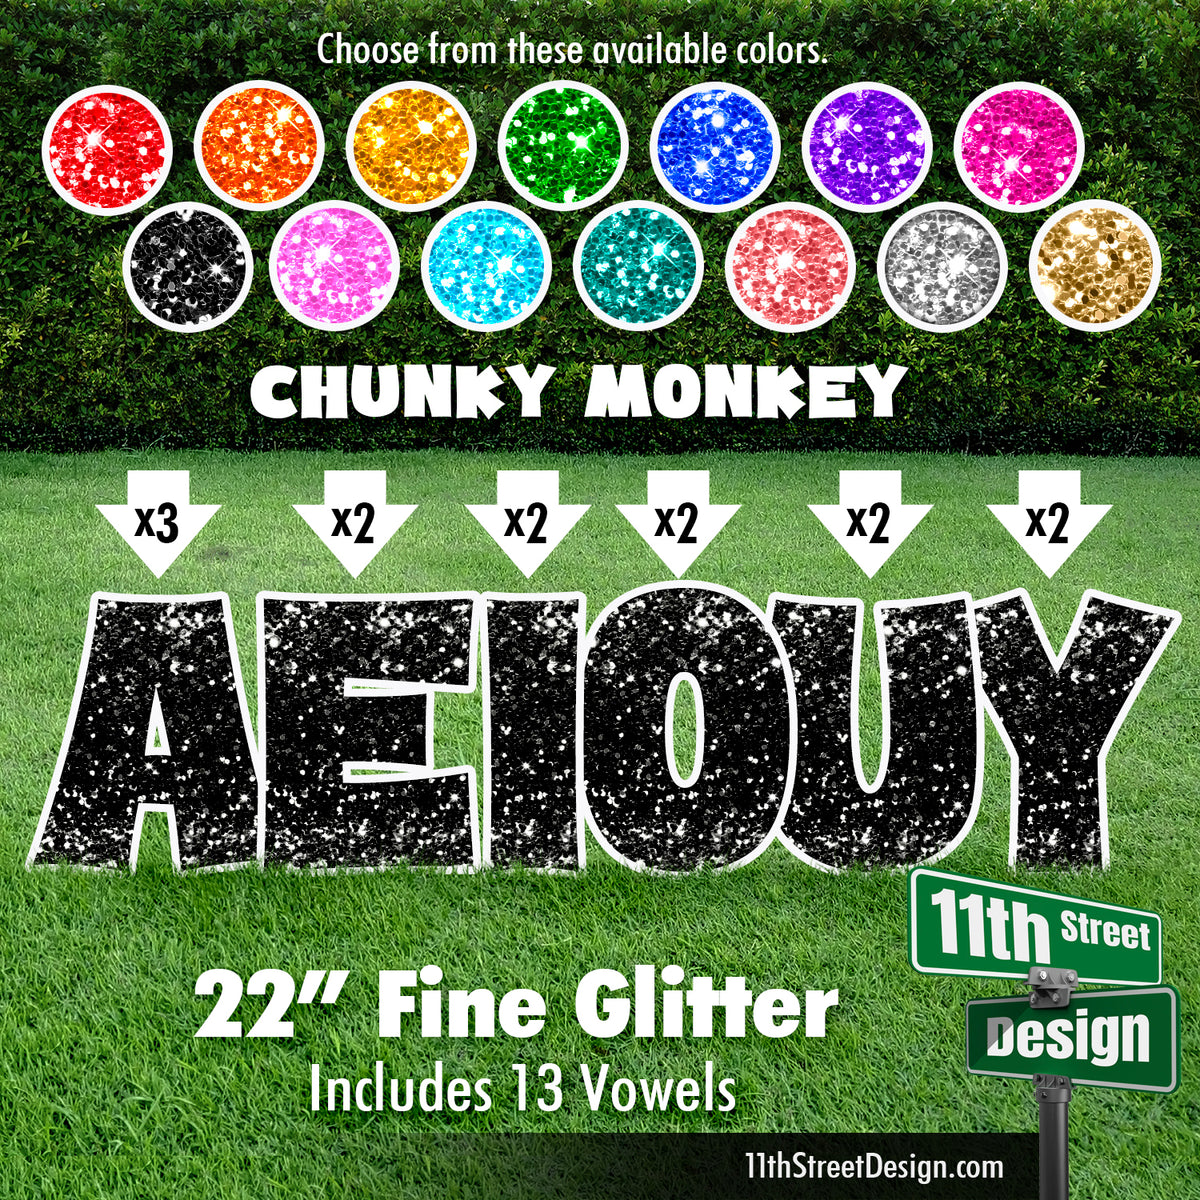 Fine Glitter 22&quot; Chunky Monkey Yard Card Set Includes 13 Vowels